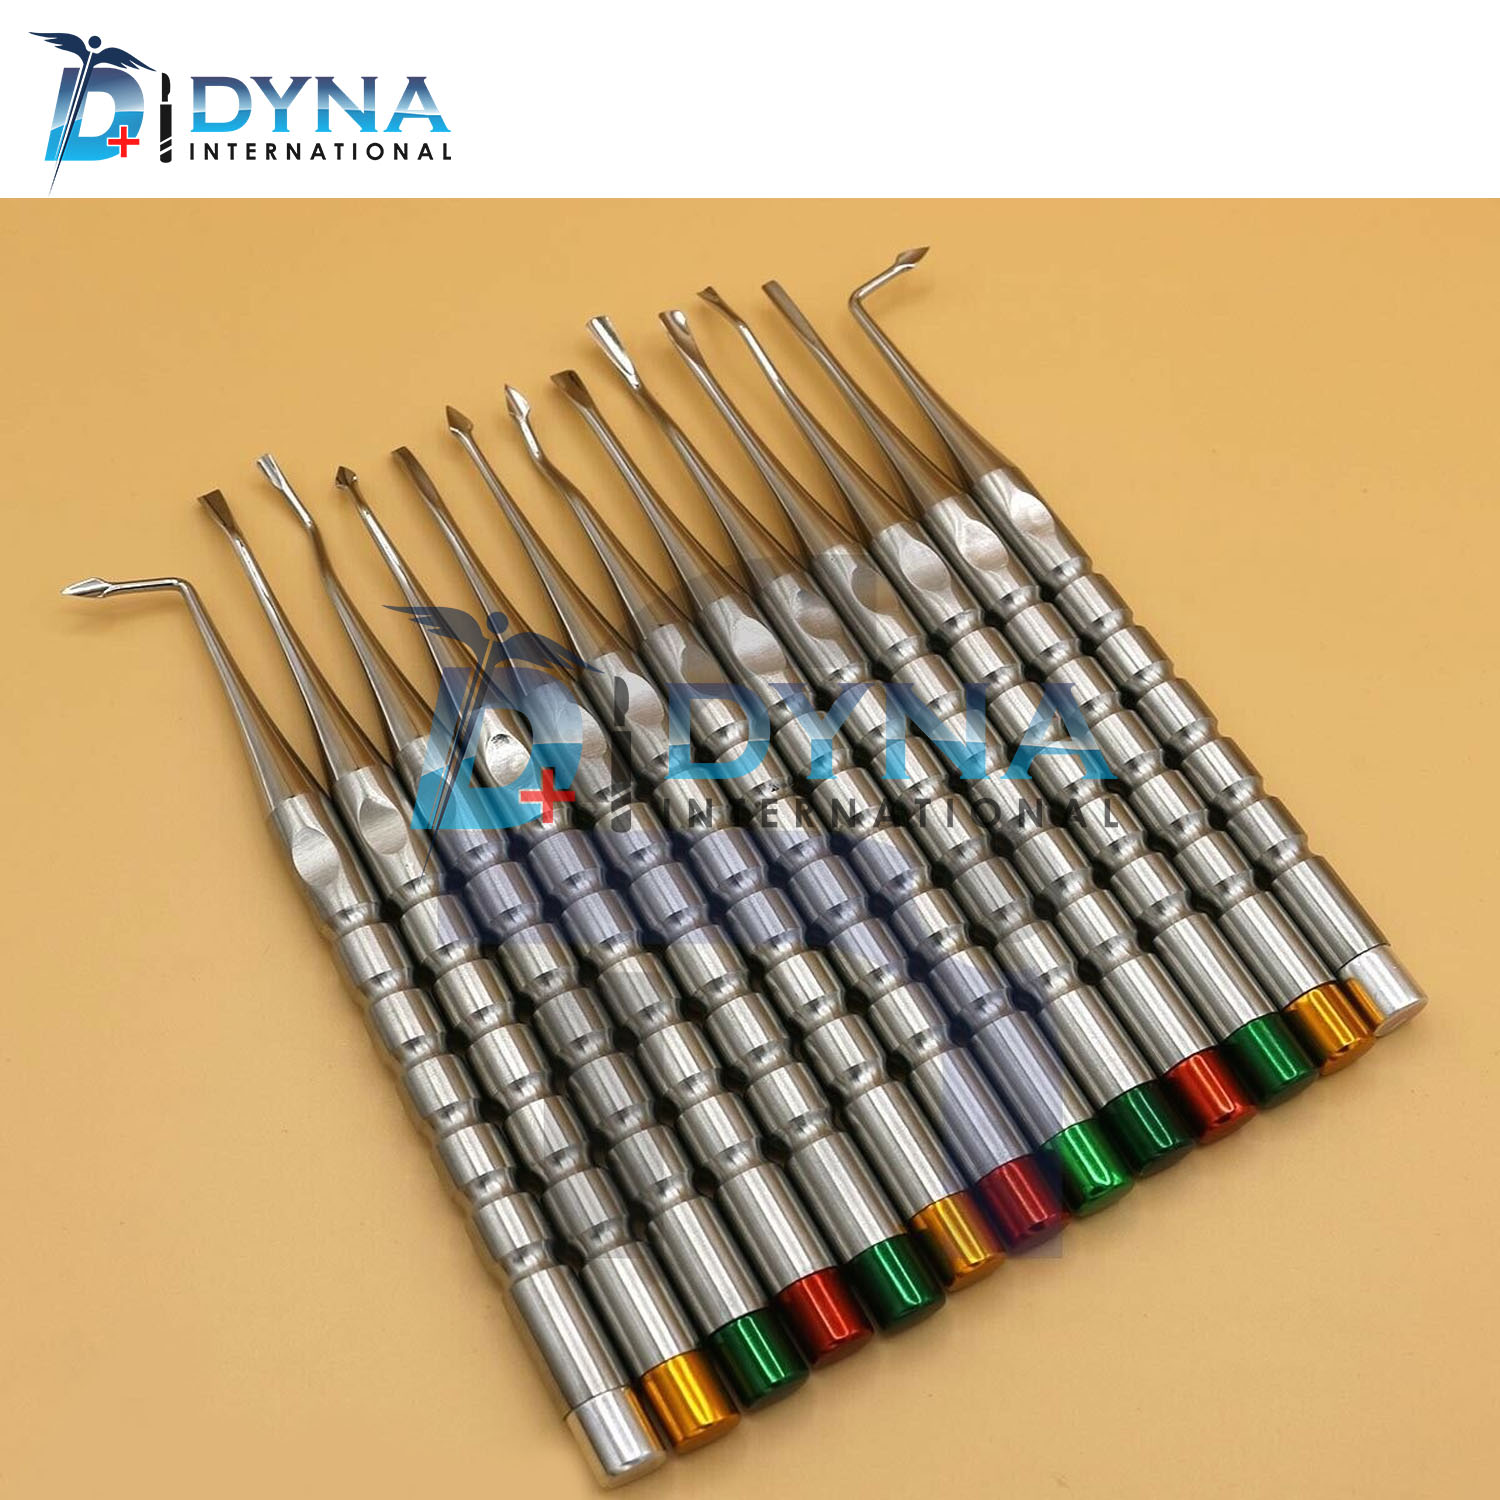 13-Pcs-Luxating-Dental-Root-Tip-Extracting-Elevators-Instruments-Surgery-Inst.jpg